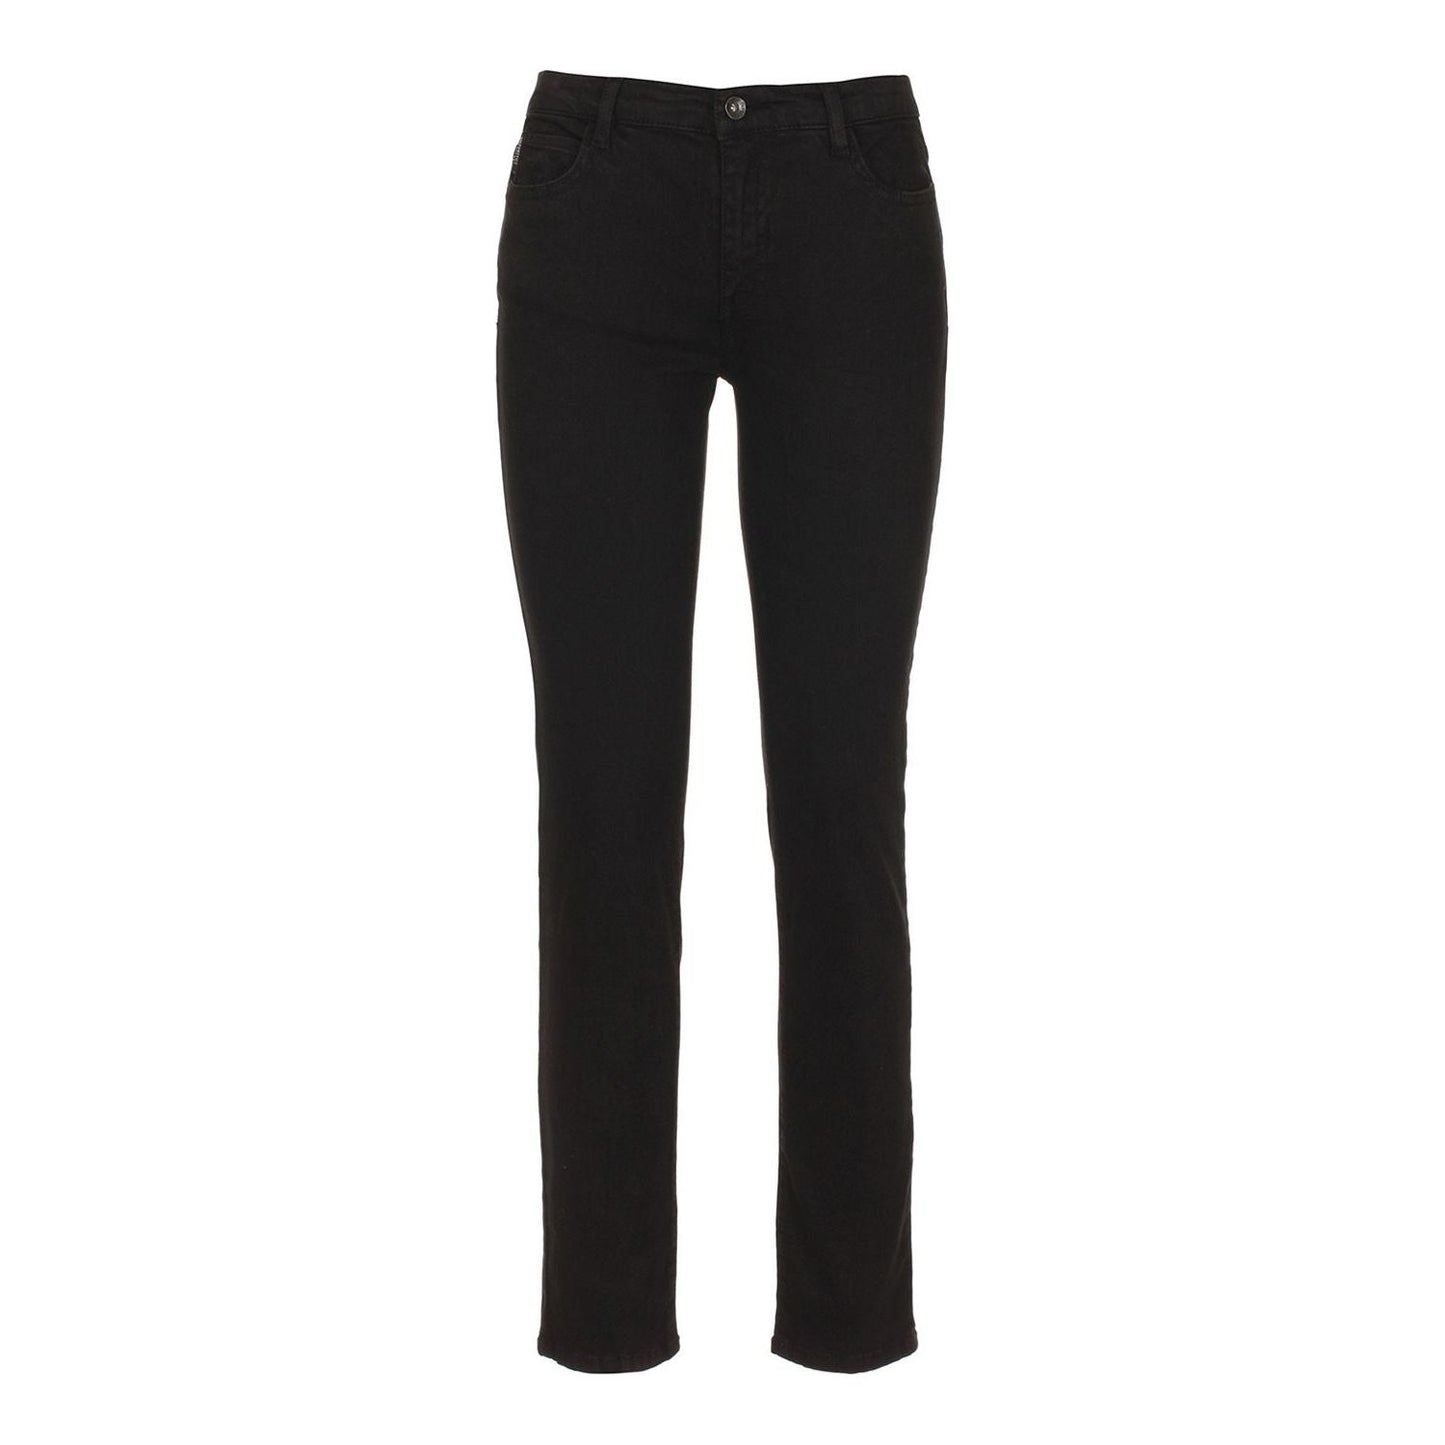 Imperfect Chic Black Cotton Blend Trousers iwwpu-imperfect-jeans-pant-1 Jeans & Pants stock_product_image_1623_335142326-84020315-bd7.jpg